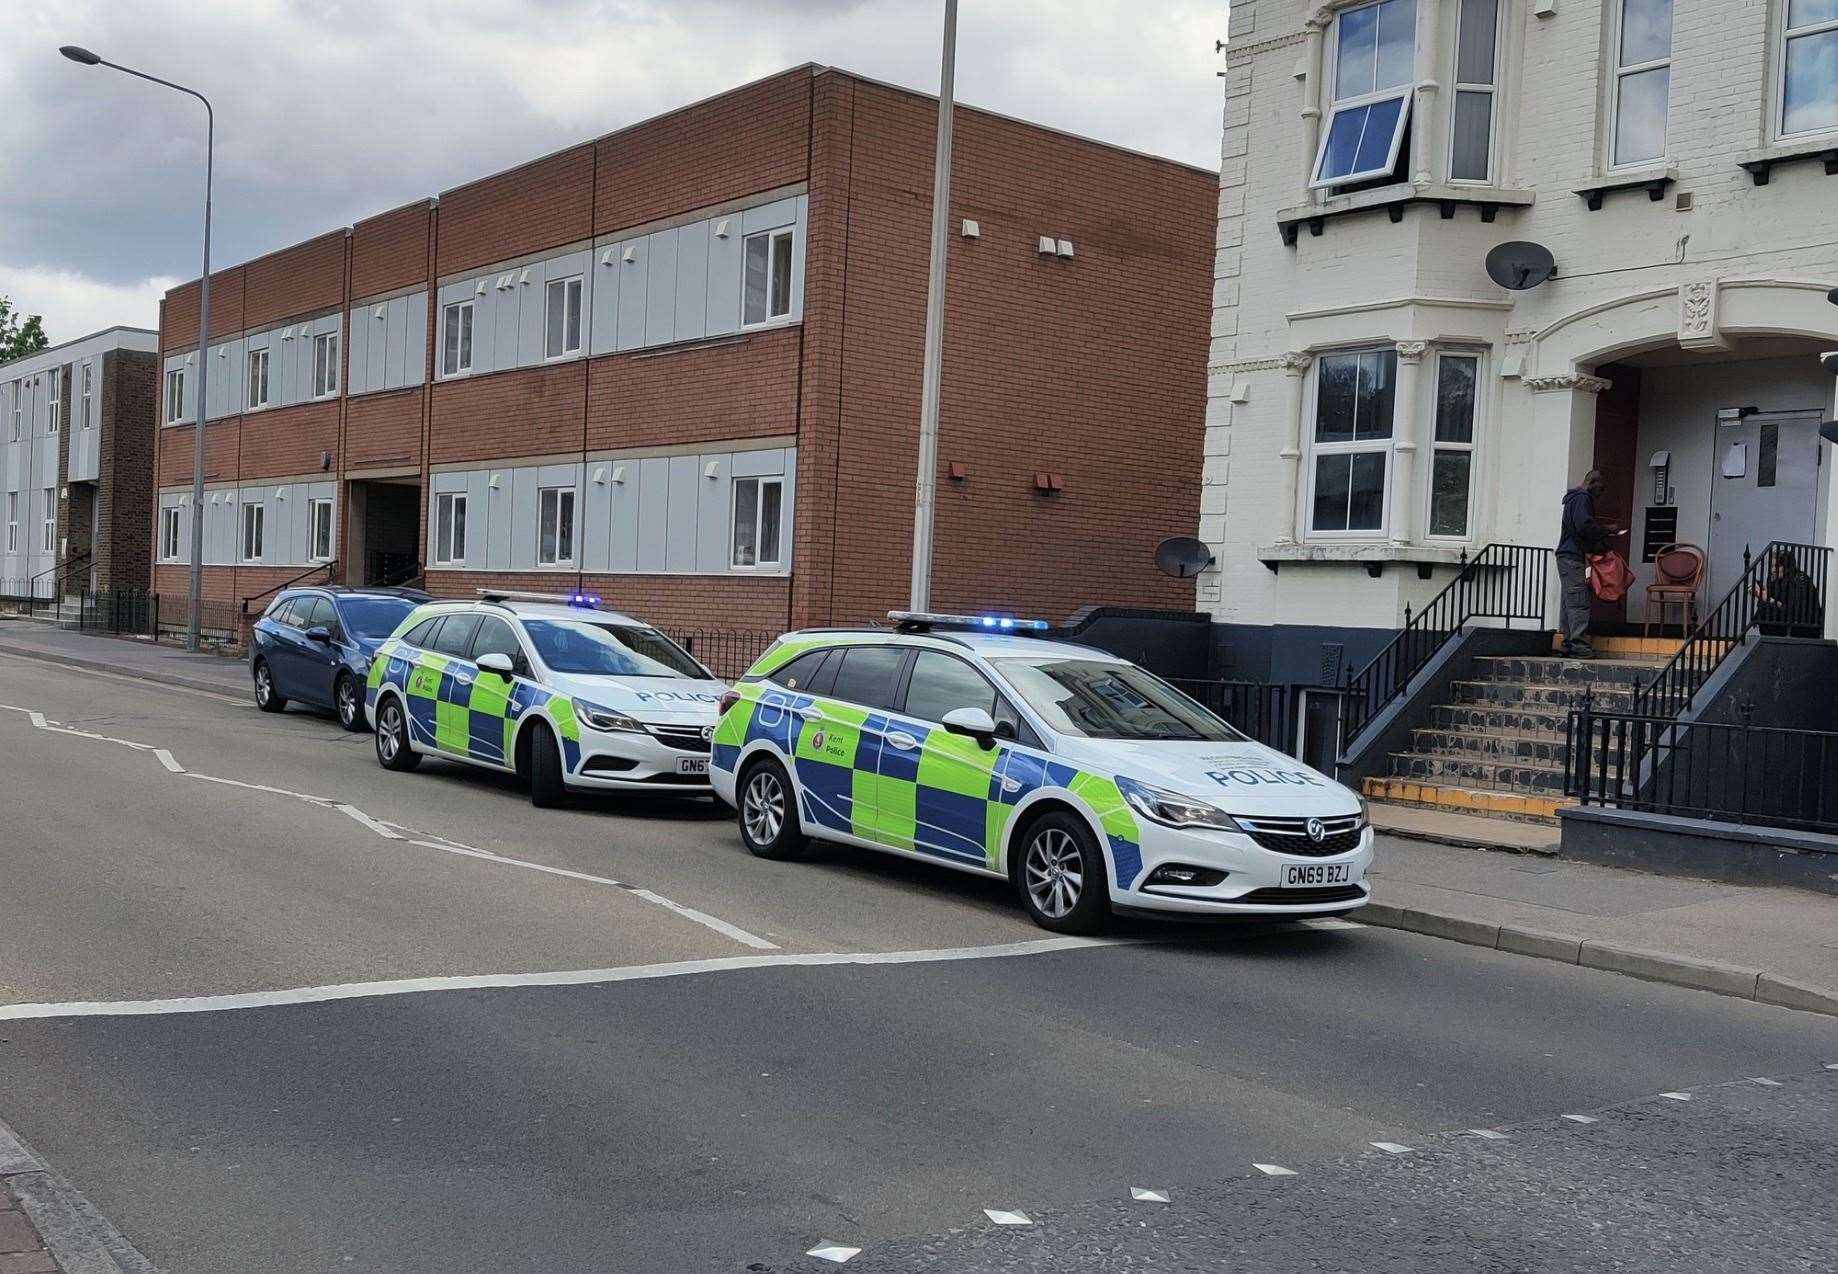 Police were called to a property in New Road, Chatham and arrested a man on suspicion of breaching probation conditions. Picture: George Aztev